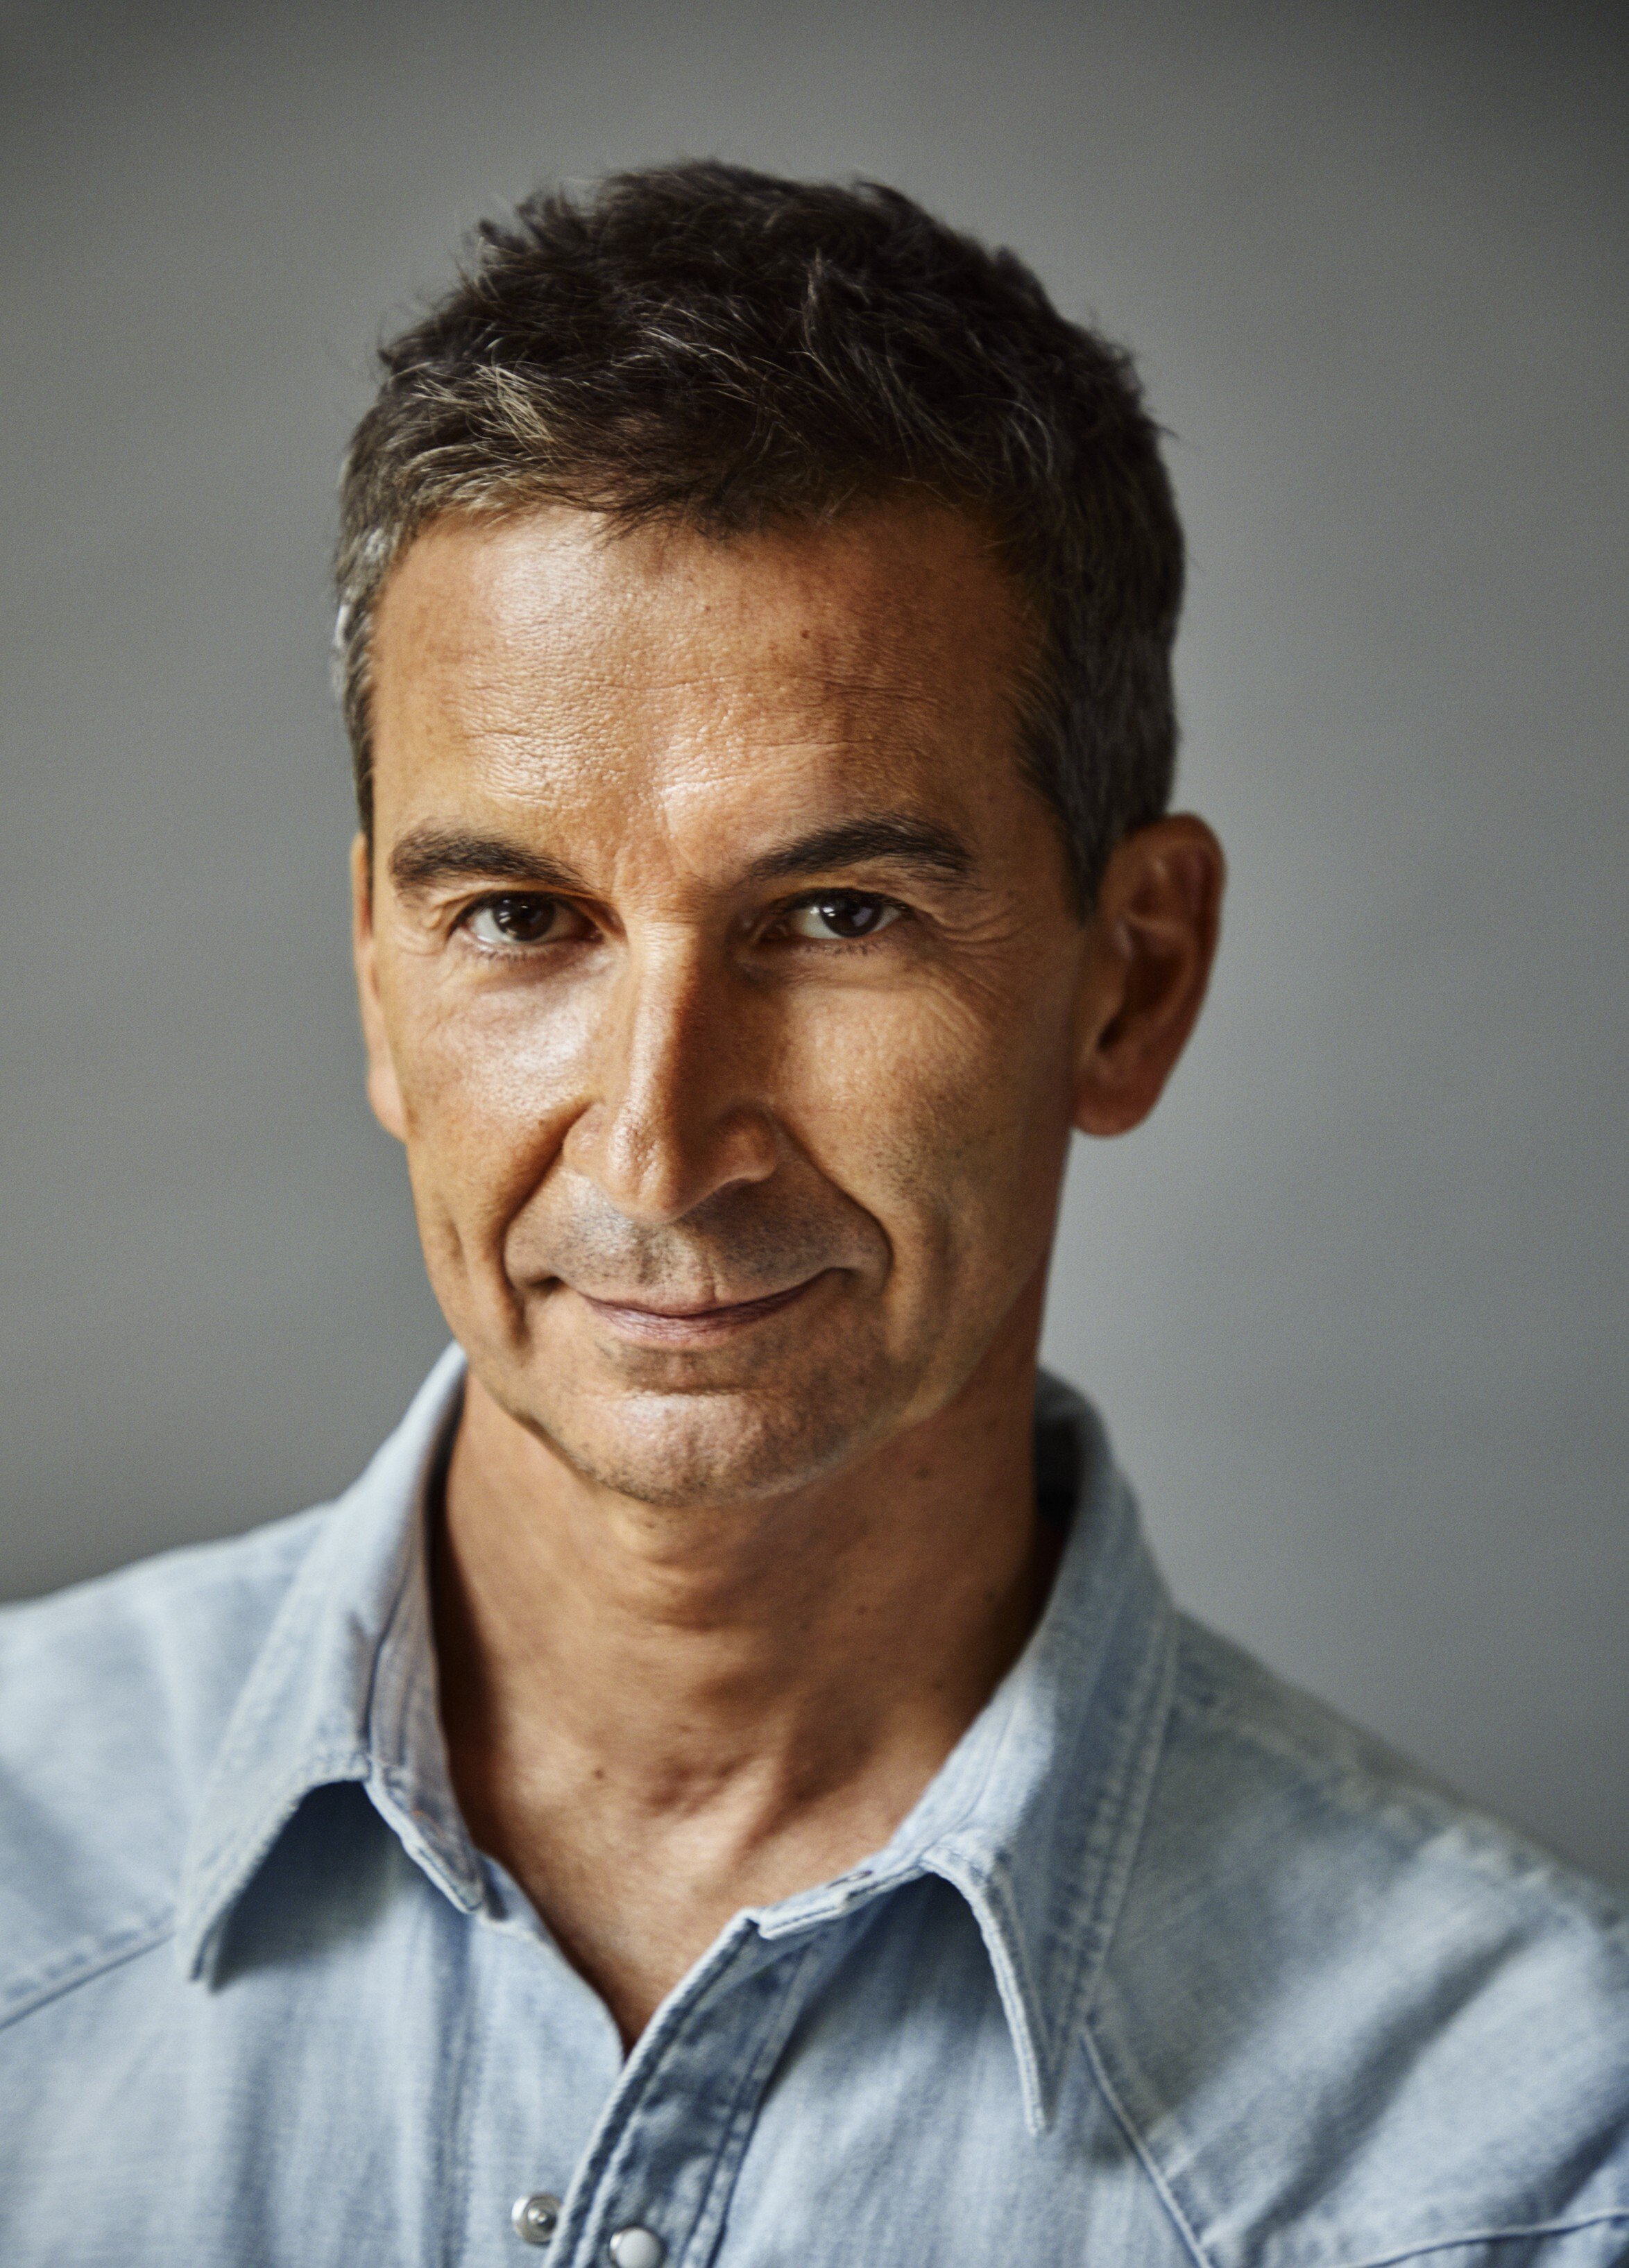 Federico Marchetti is the chairman and CEO of Yoox Net-a-Porter Group, which celebrates its 20th anniversary this year. Photo: Handout